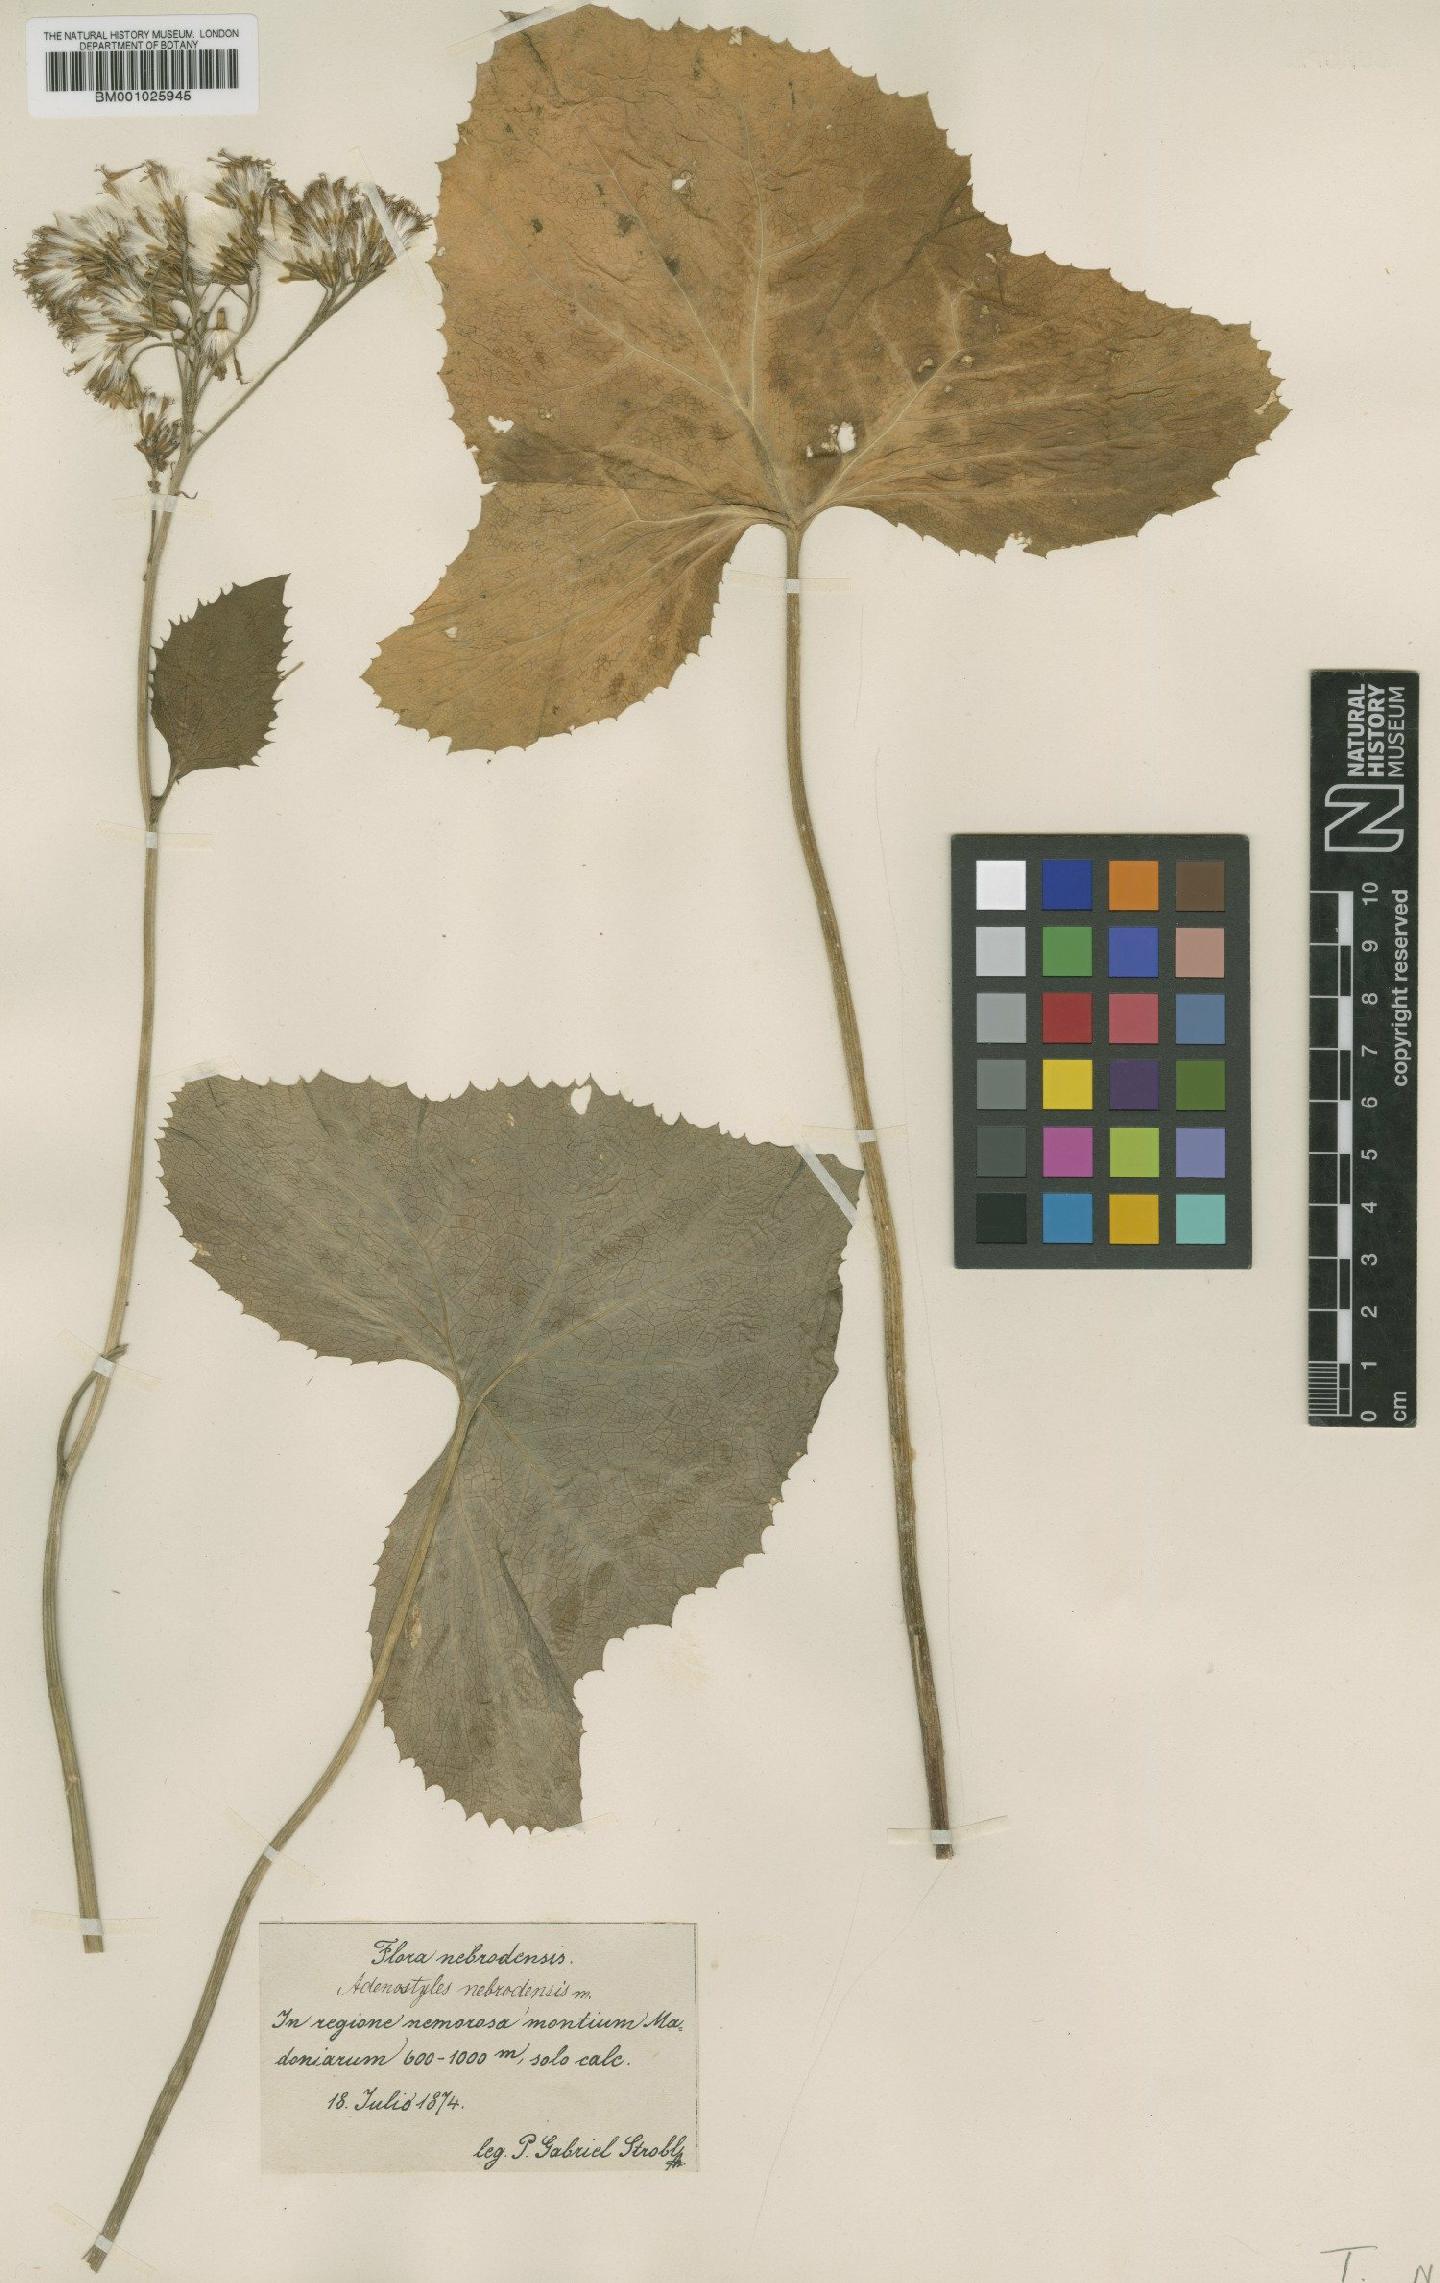 To NHMUK collection (Adenostyles nebrodensis Strobl; Type; NHMUK:ecatalogue:1920524)